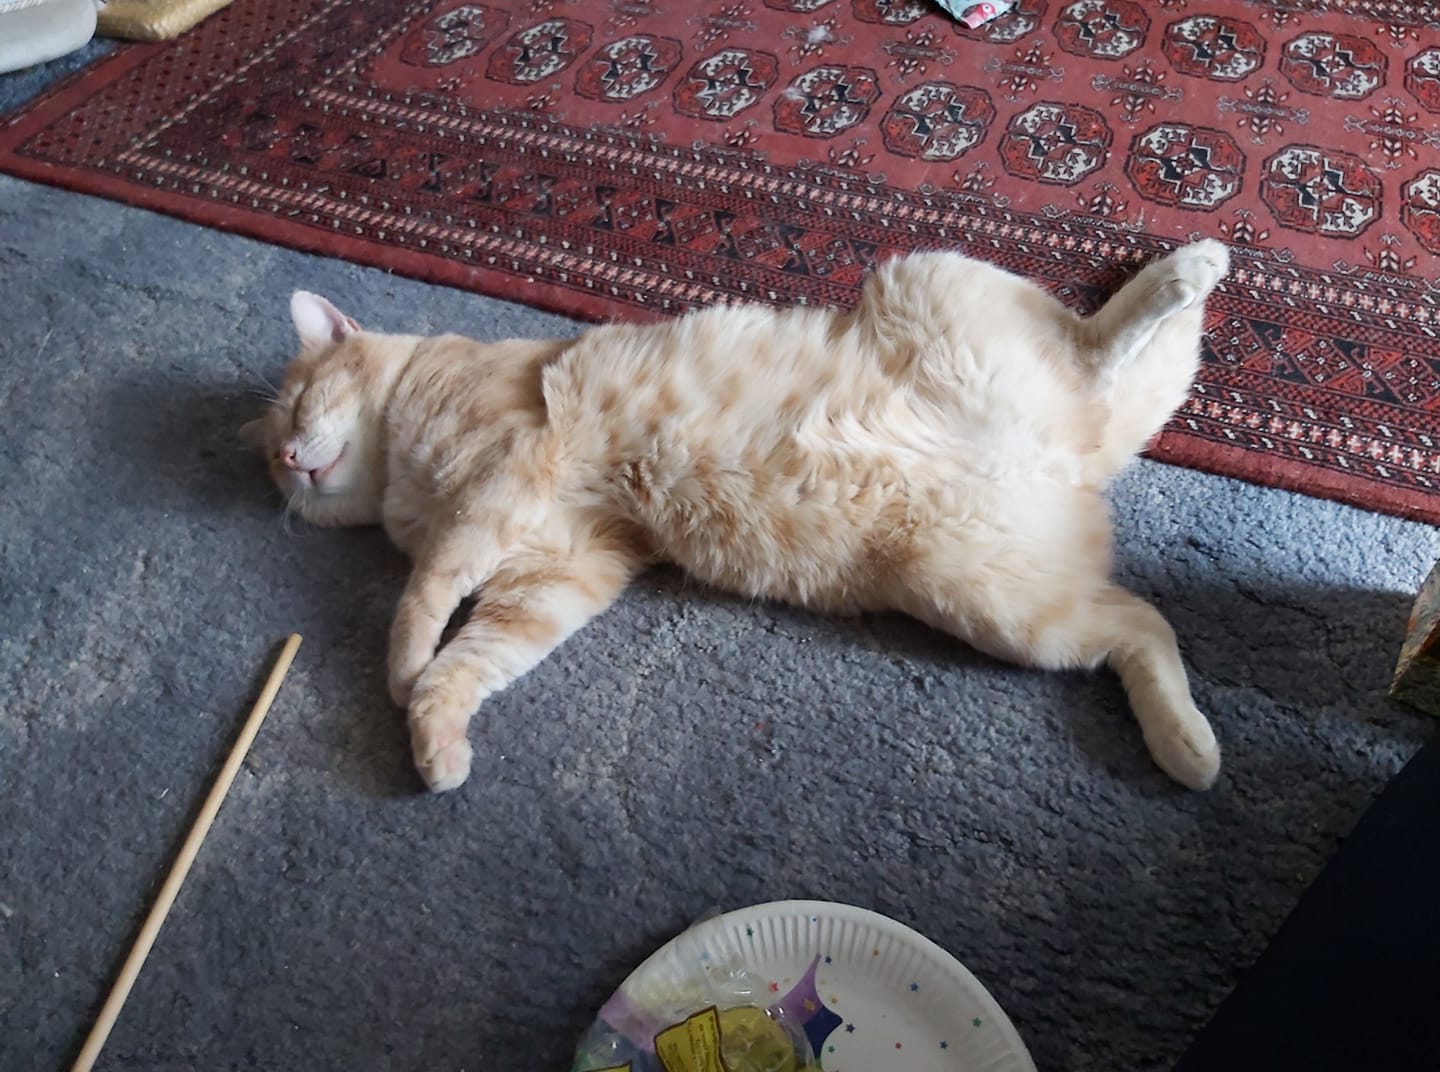 Charlie stretched on the rug in front of the fire, relaxing